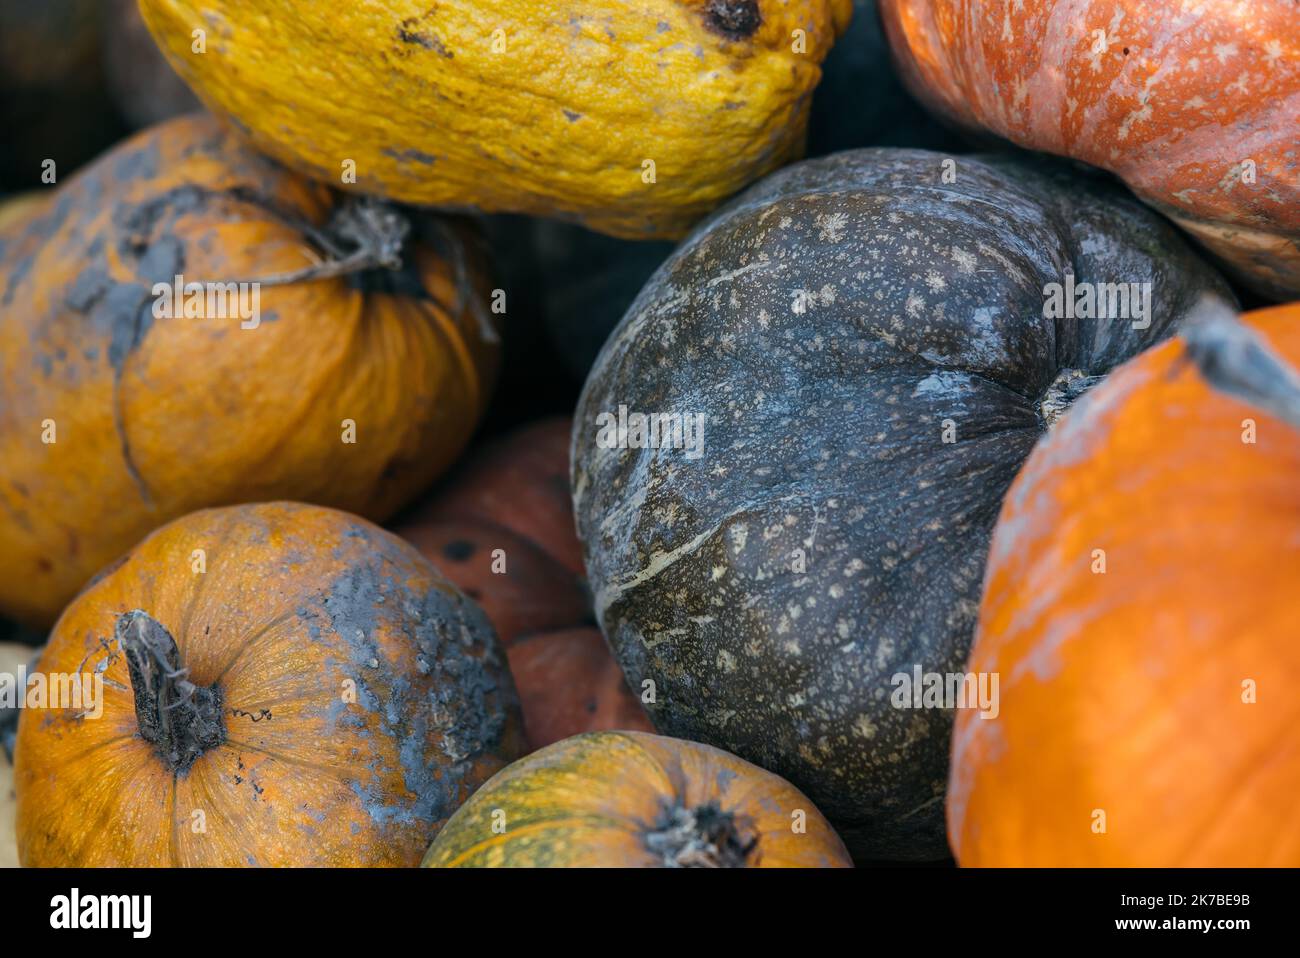 Diverse assortment of pumpkins in the market. Close view Stock Photo